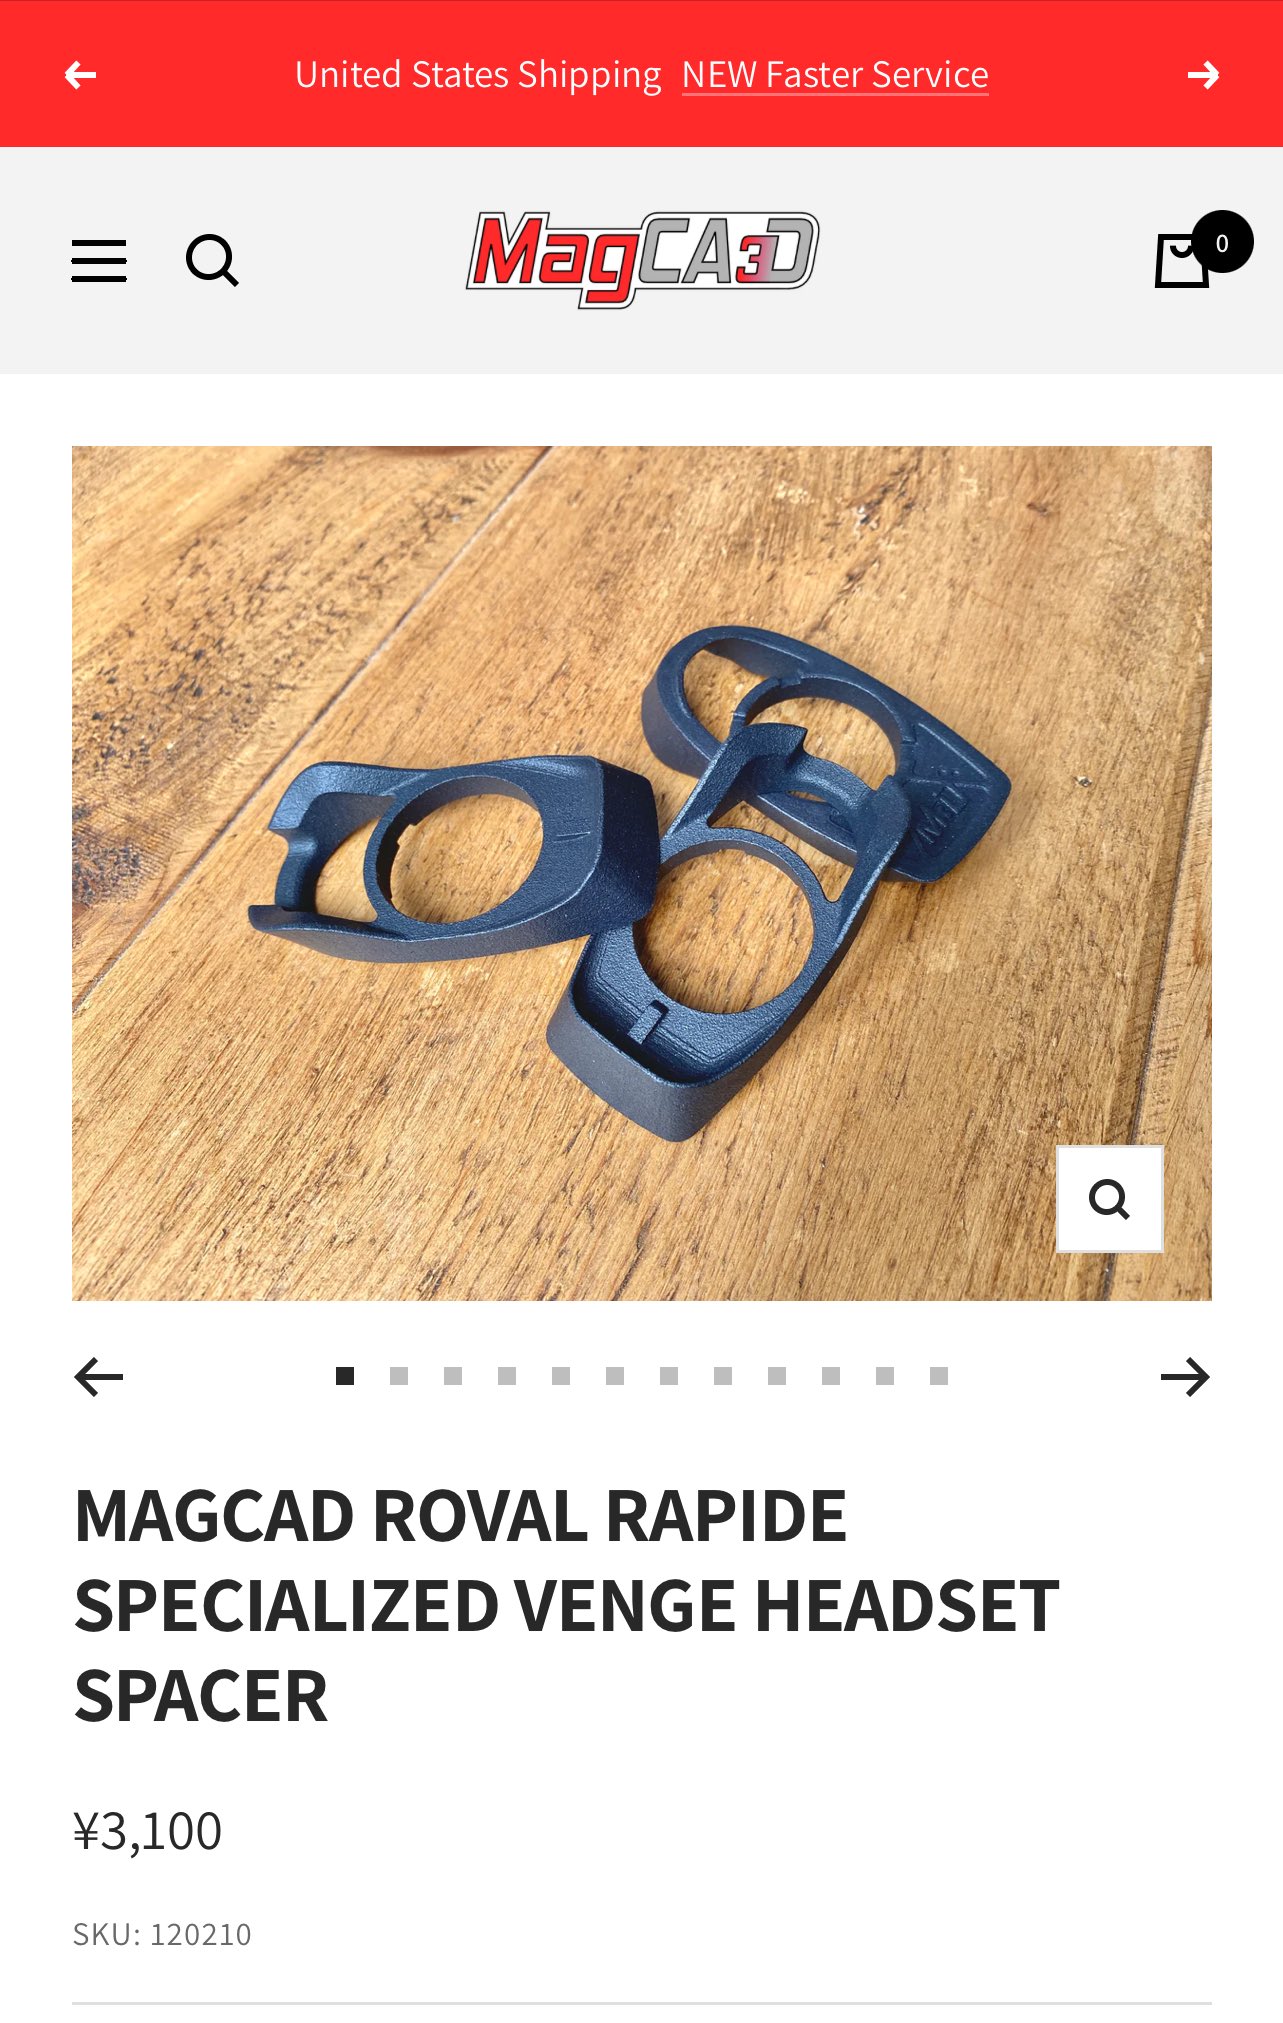 MagCAD Roval Rapide Specialized Venge Headset Spacer